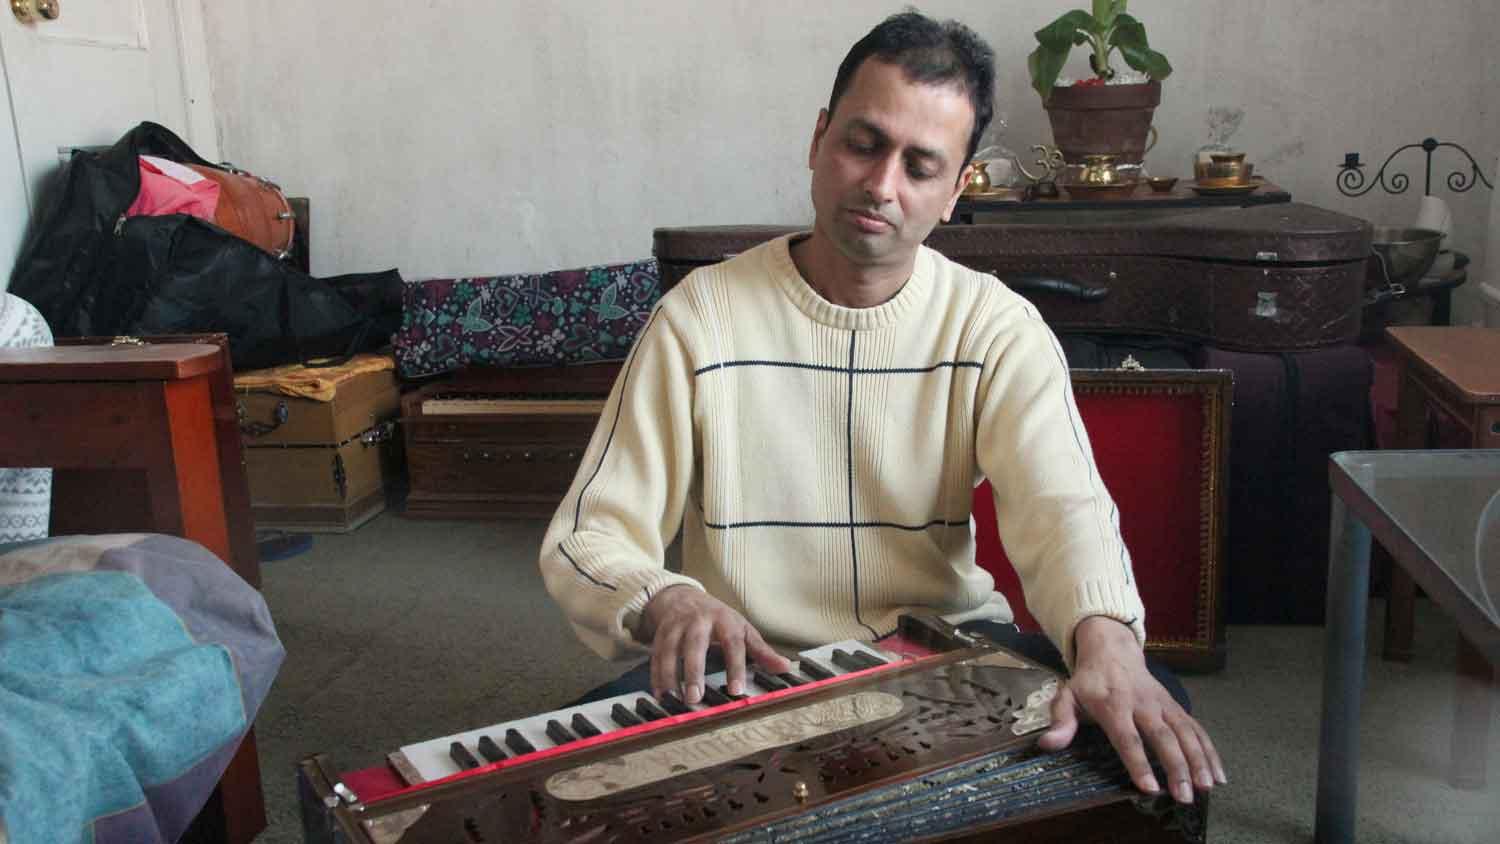 “I think I’m blessed in tuning harmoniums,” says Mindra Sahadeo, who is from Guyana but now lives in New York City. “I find joy, actually, in fixing them.”